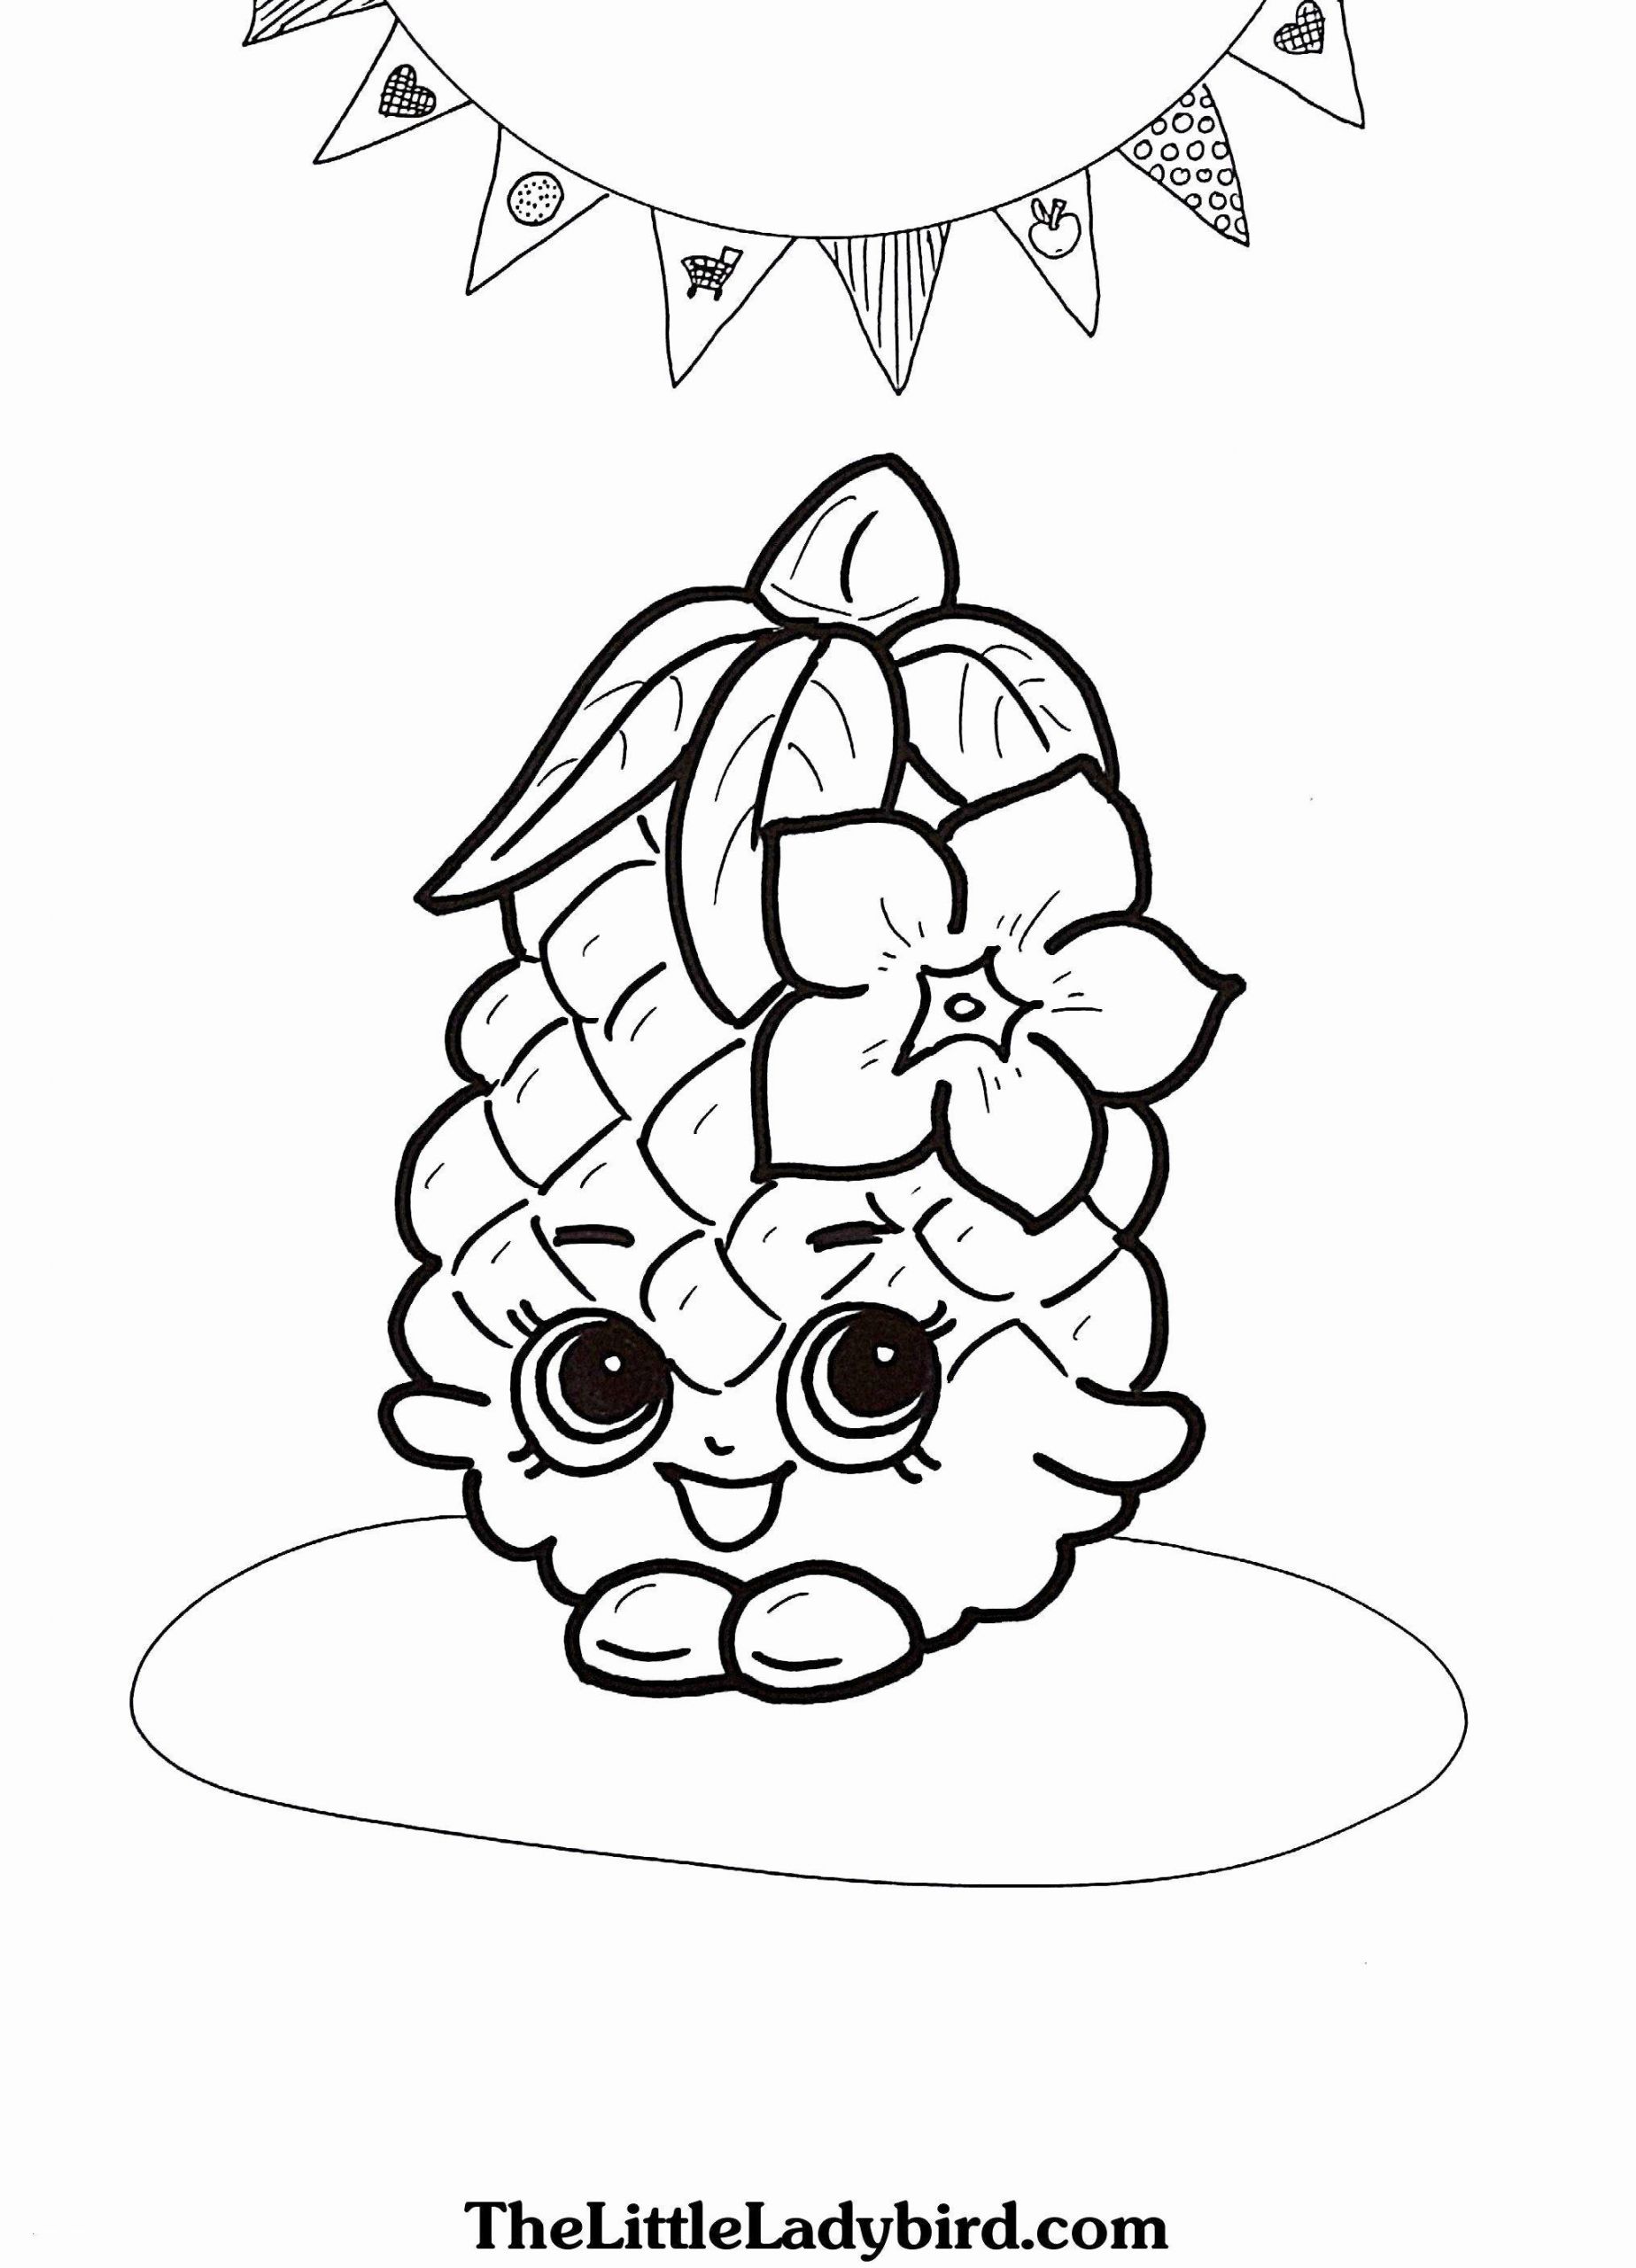 coloring pages : Free Halloween Pictures To Color Unique Drawing Book Pages  For Kids In 2020 Free Halloween Pictures to Color ~ affiliateprogrambook.com